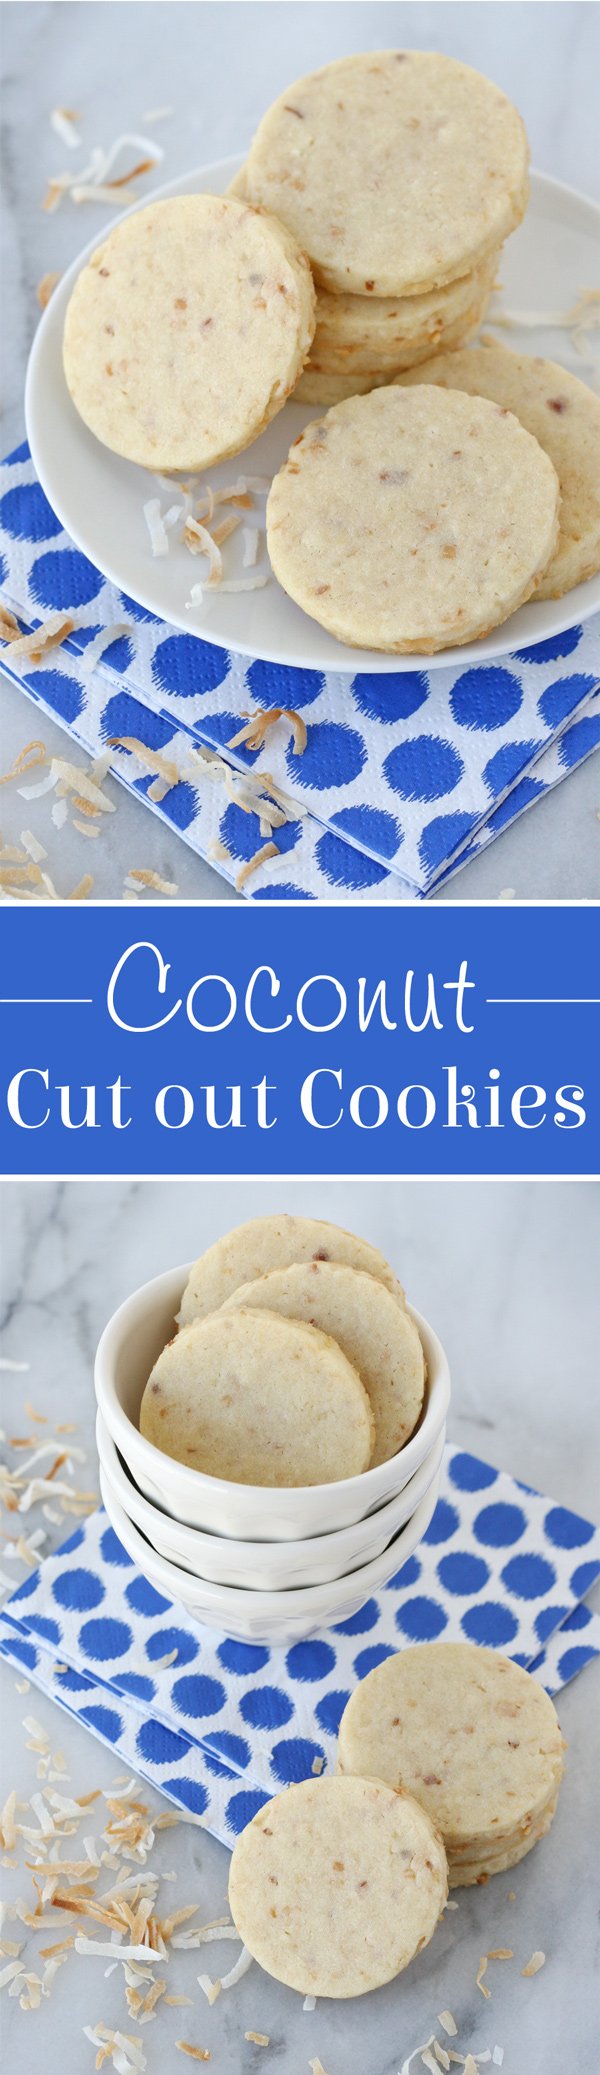 These Coconut Cut Out Cookies are delicious as is, and are the perfect canvas for decorating too! 